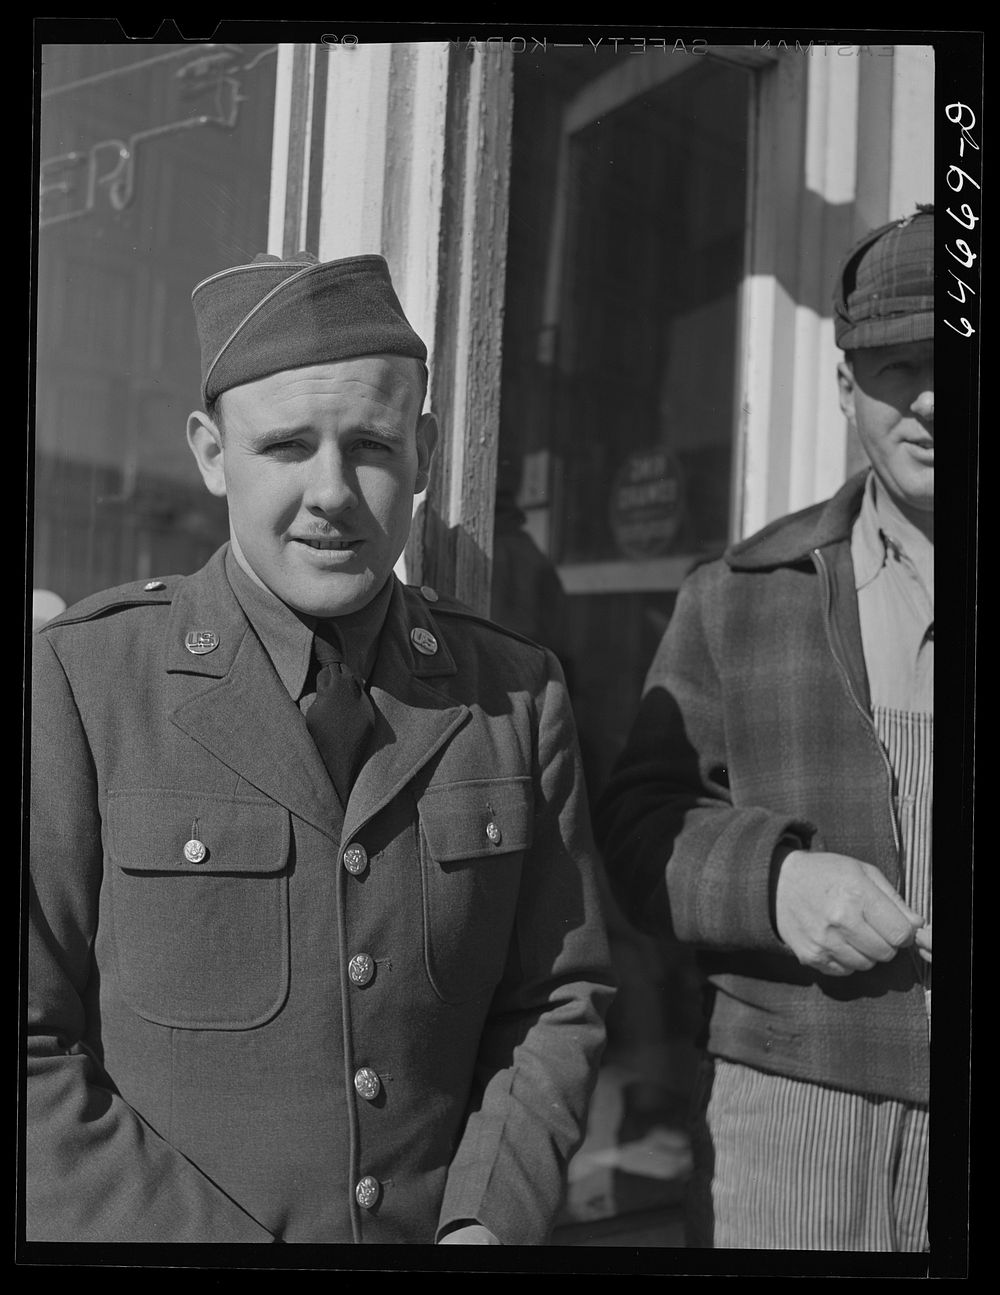 [Untitled photo, possibly related to: Bowdle, South Dakota. Soldier on furlough with friends in front of pool hall]. Sourced…